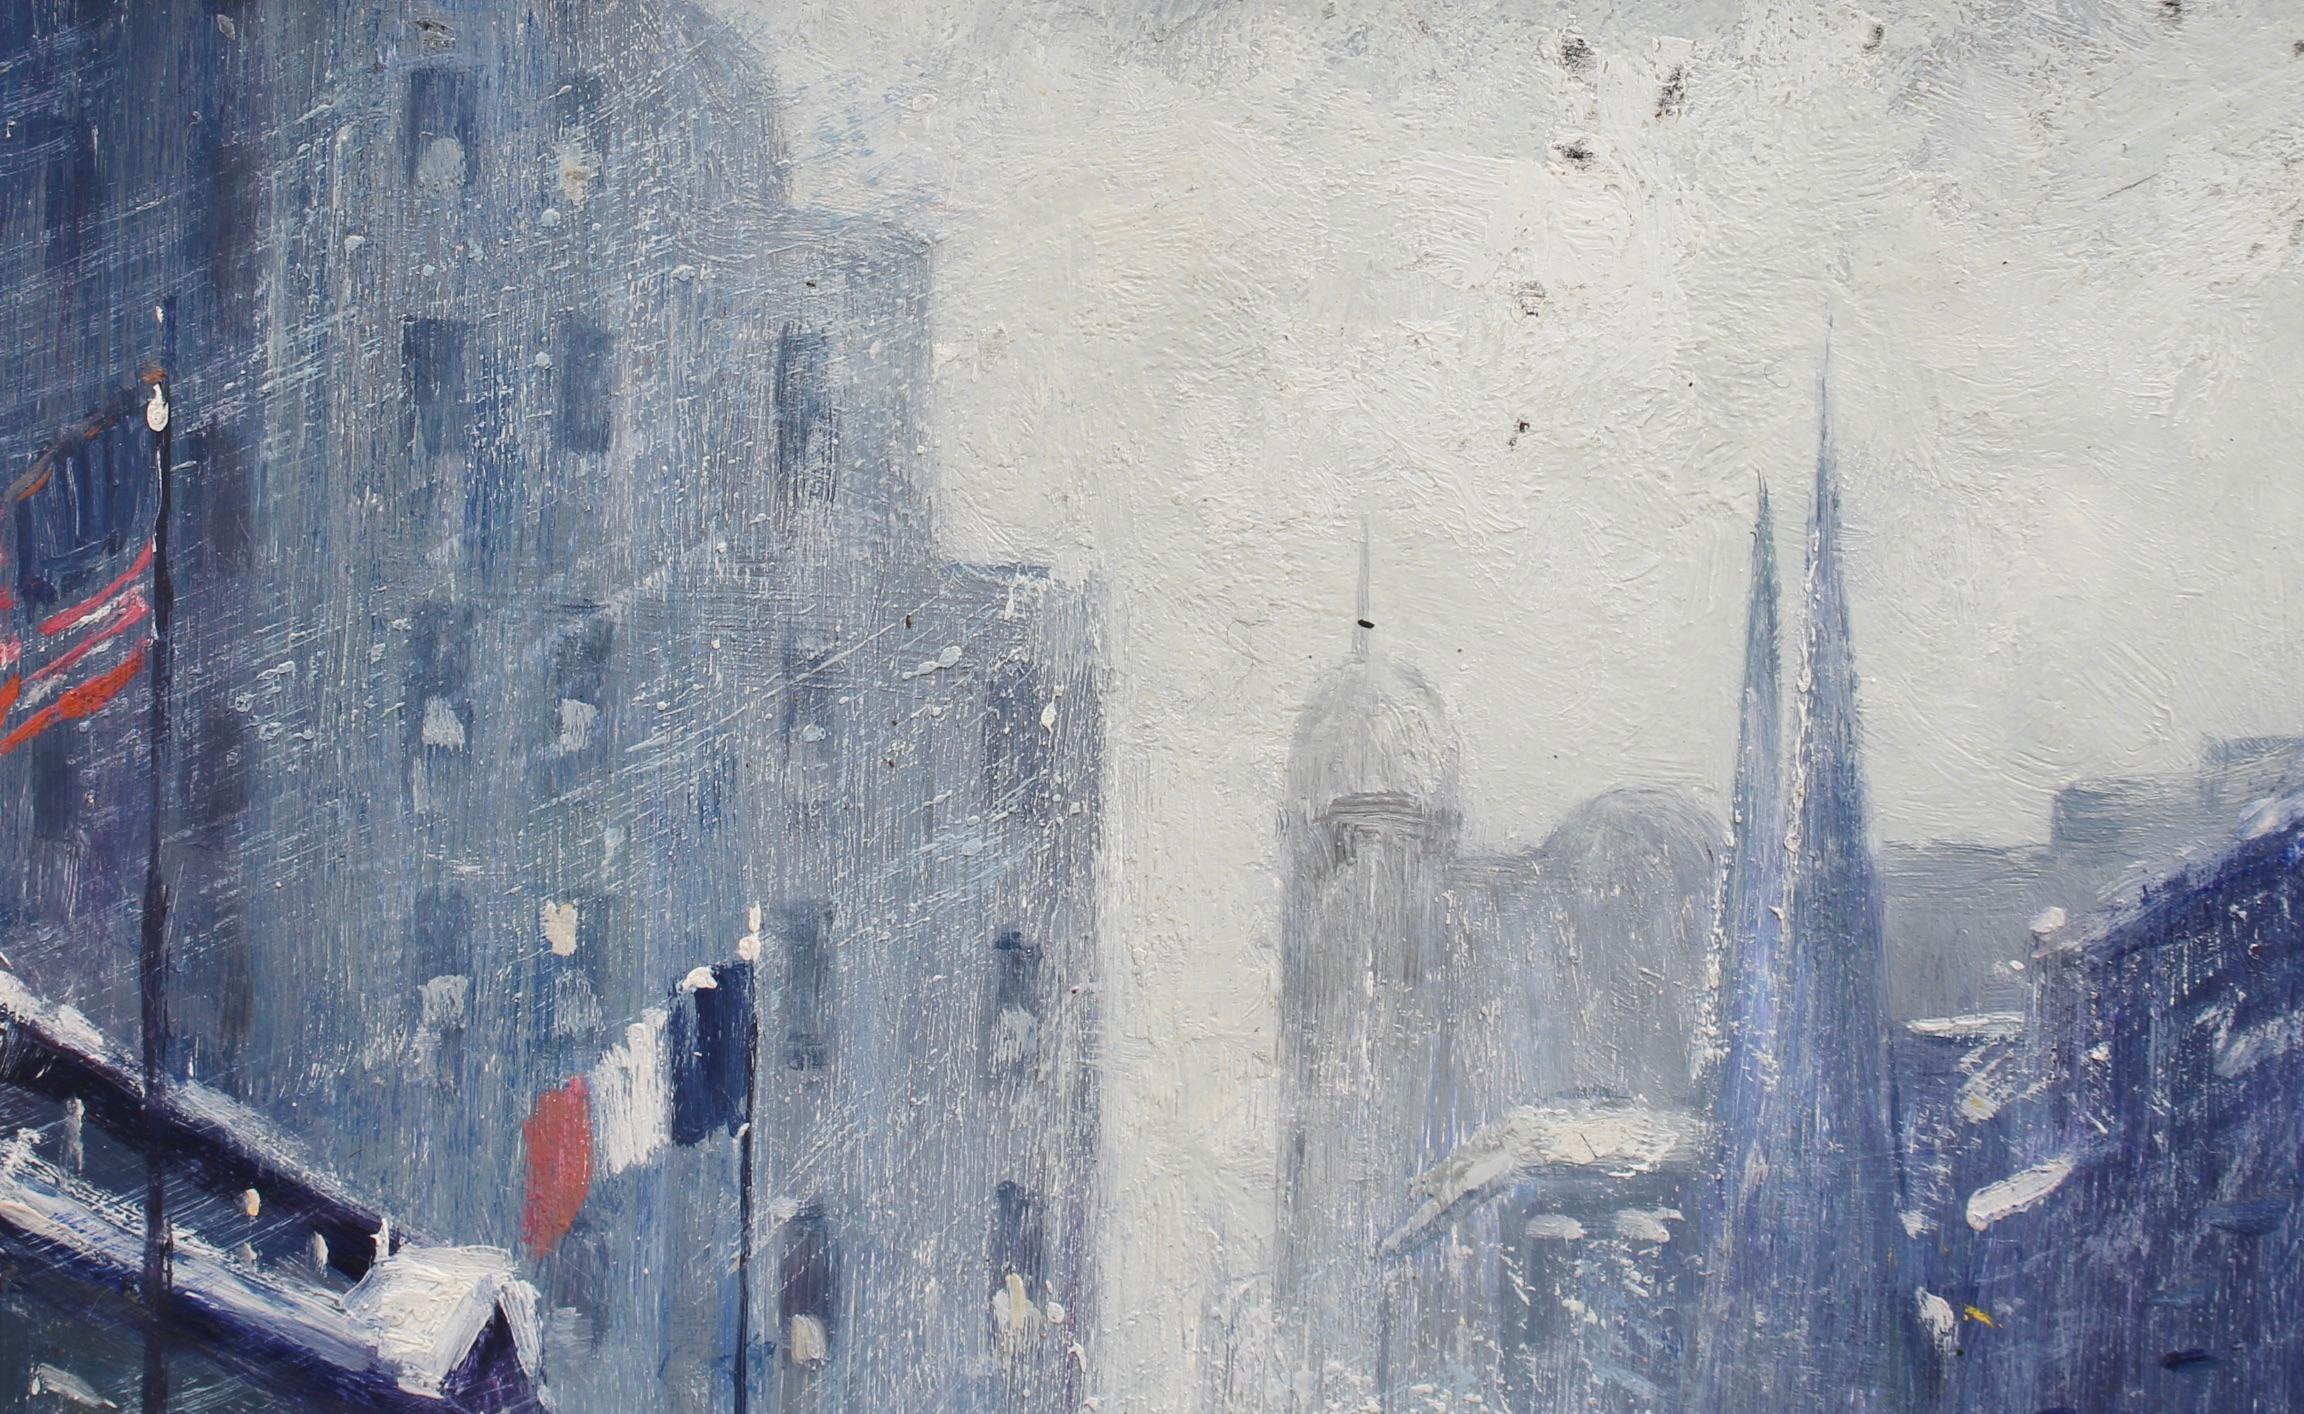 'New York Public Library Under Snow 1940s' by Finley - Post-Impressionist Painting by (After) Guy Carleton Wiggins